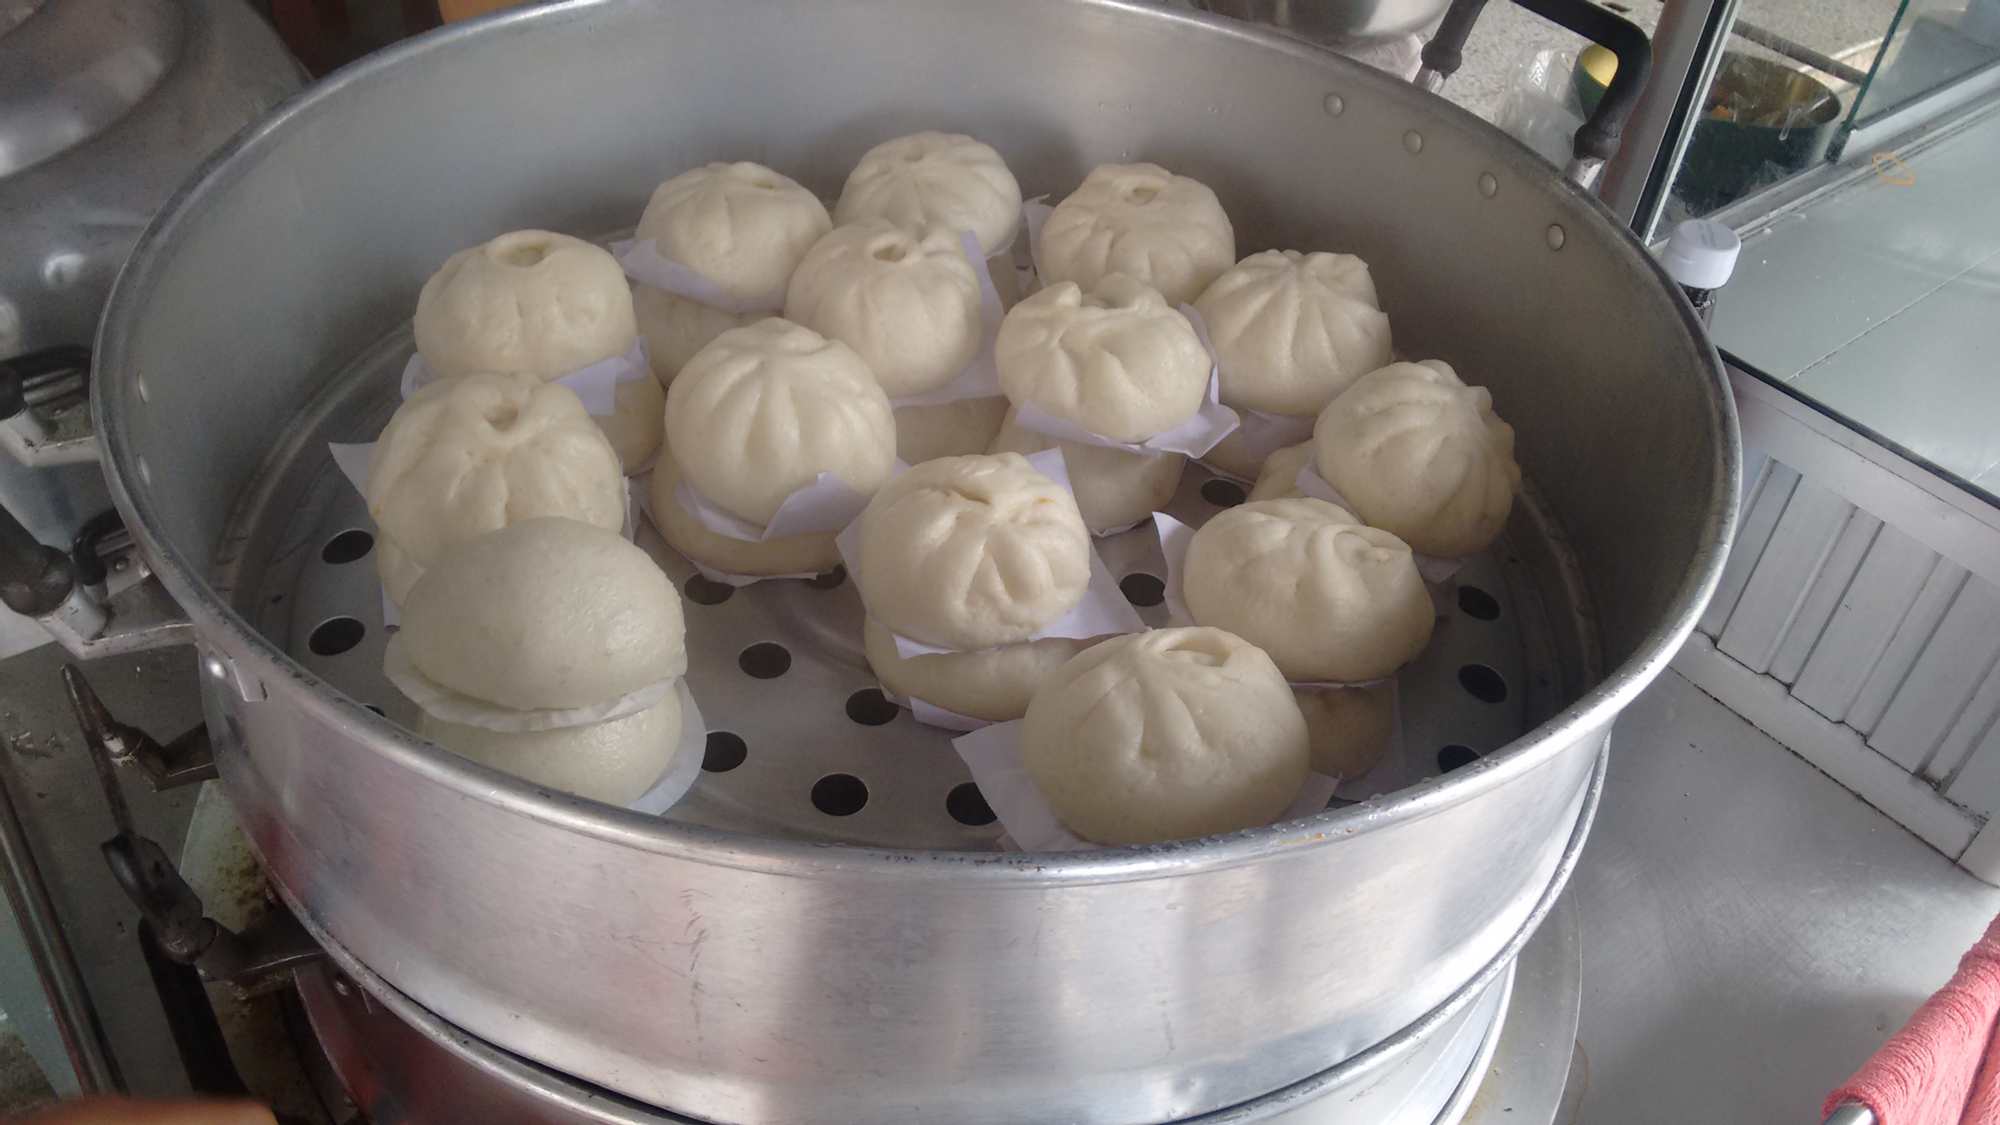 Baozi or bao, filled with meat or taro